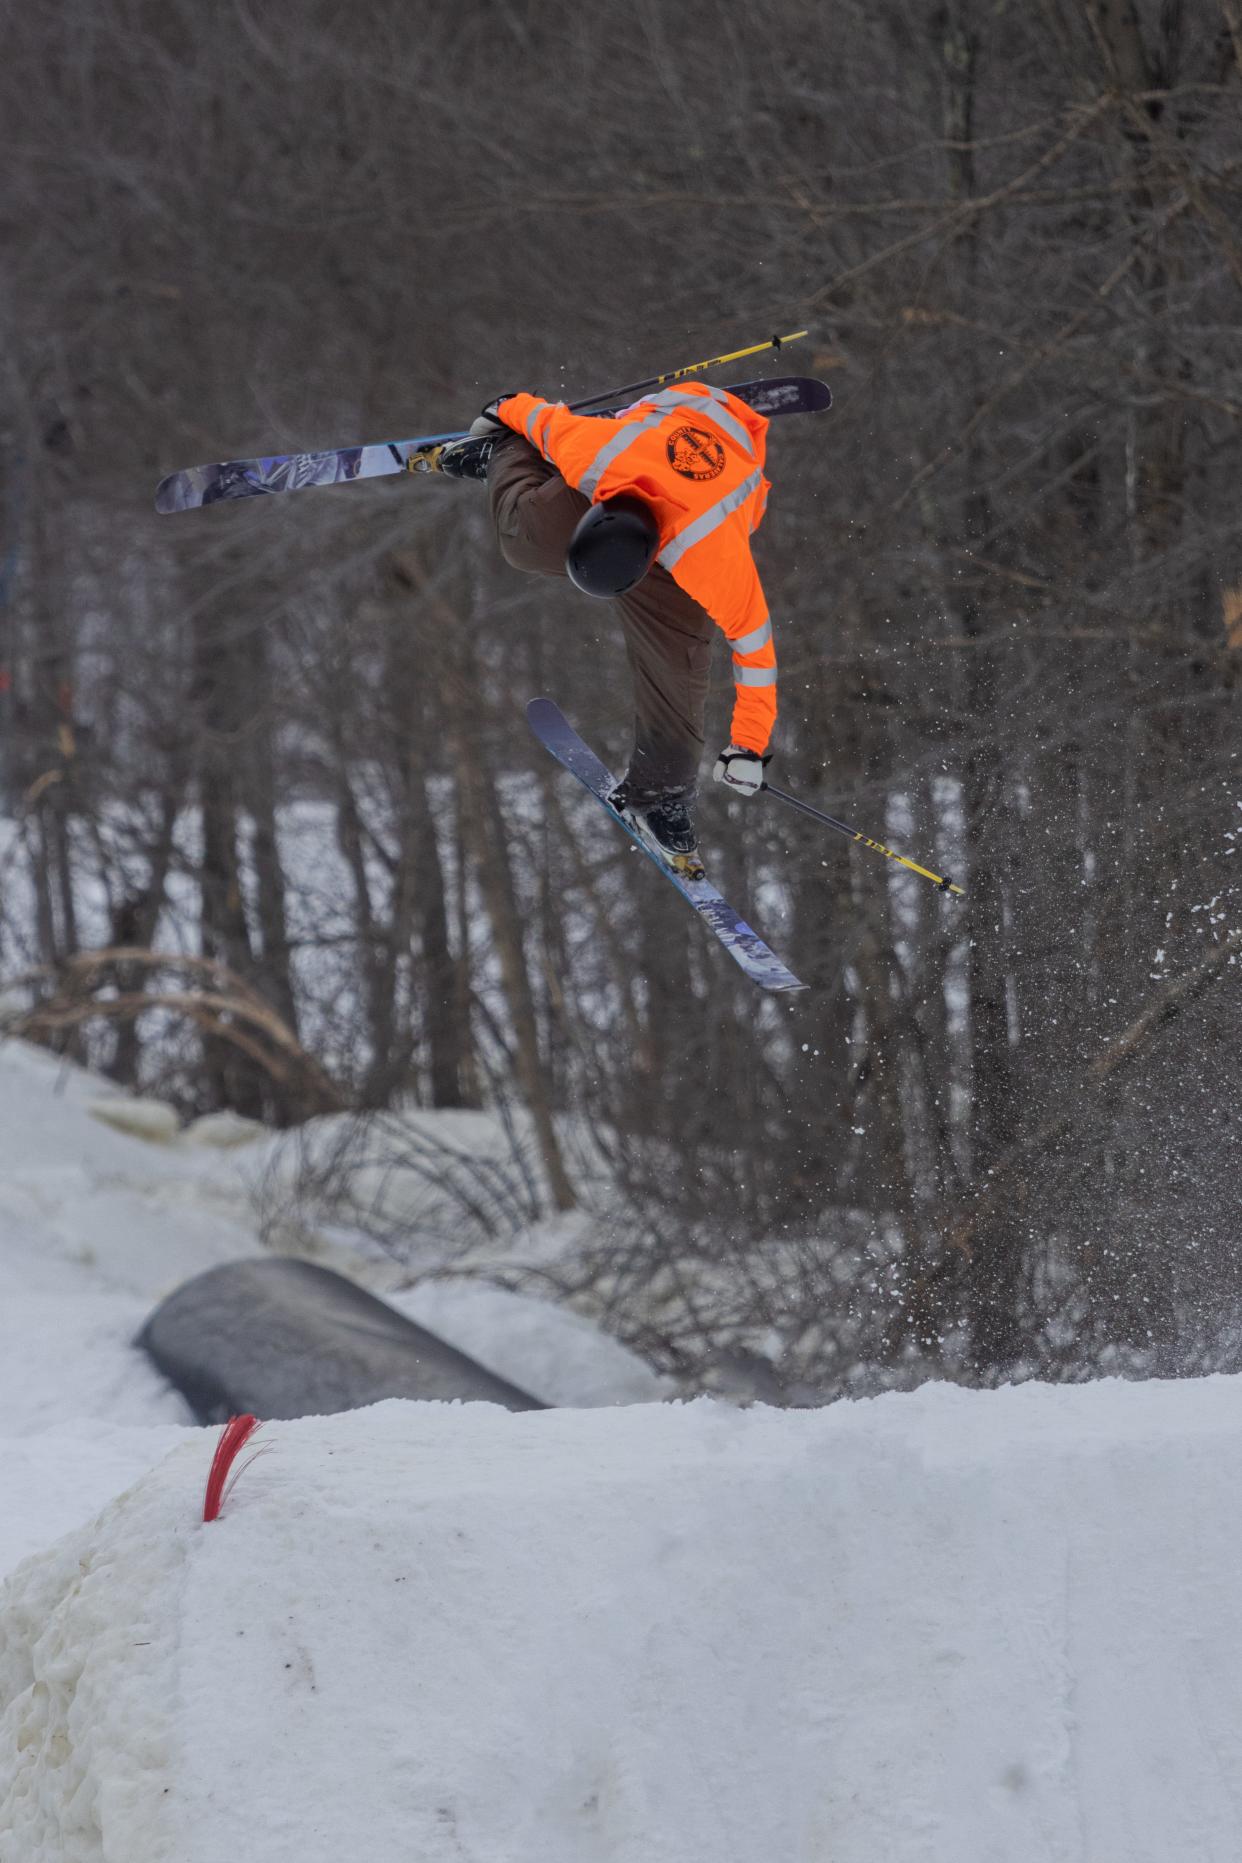 Milton's Leo Heikka is a nationally ranked freestyler skier. For the last four years he has attended Waterville Valley Academy, a snowsports-focused boarding school in New Hampshire.